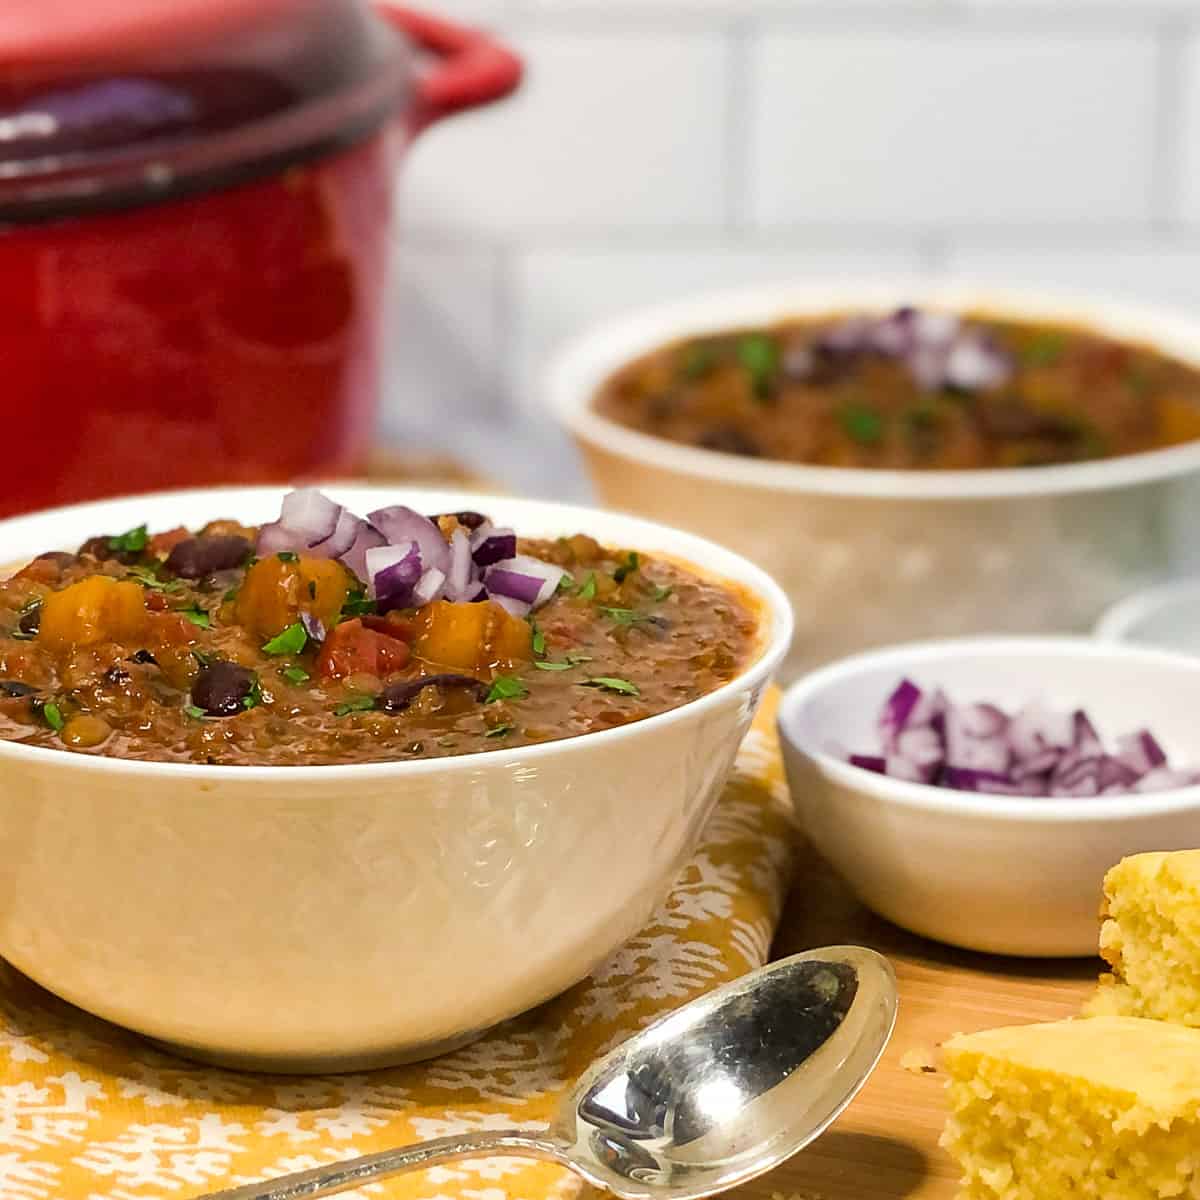 Two bowls of vegetarian chili in front of a Dutch oven.